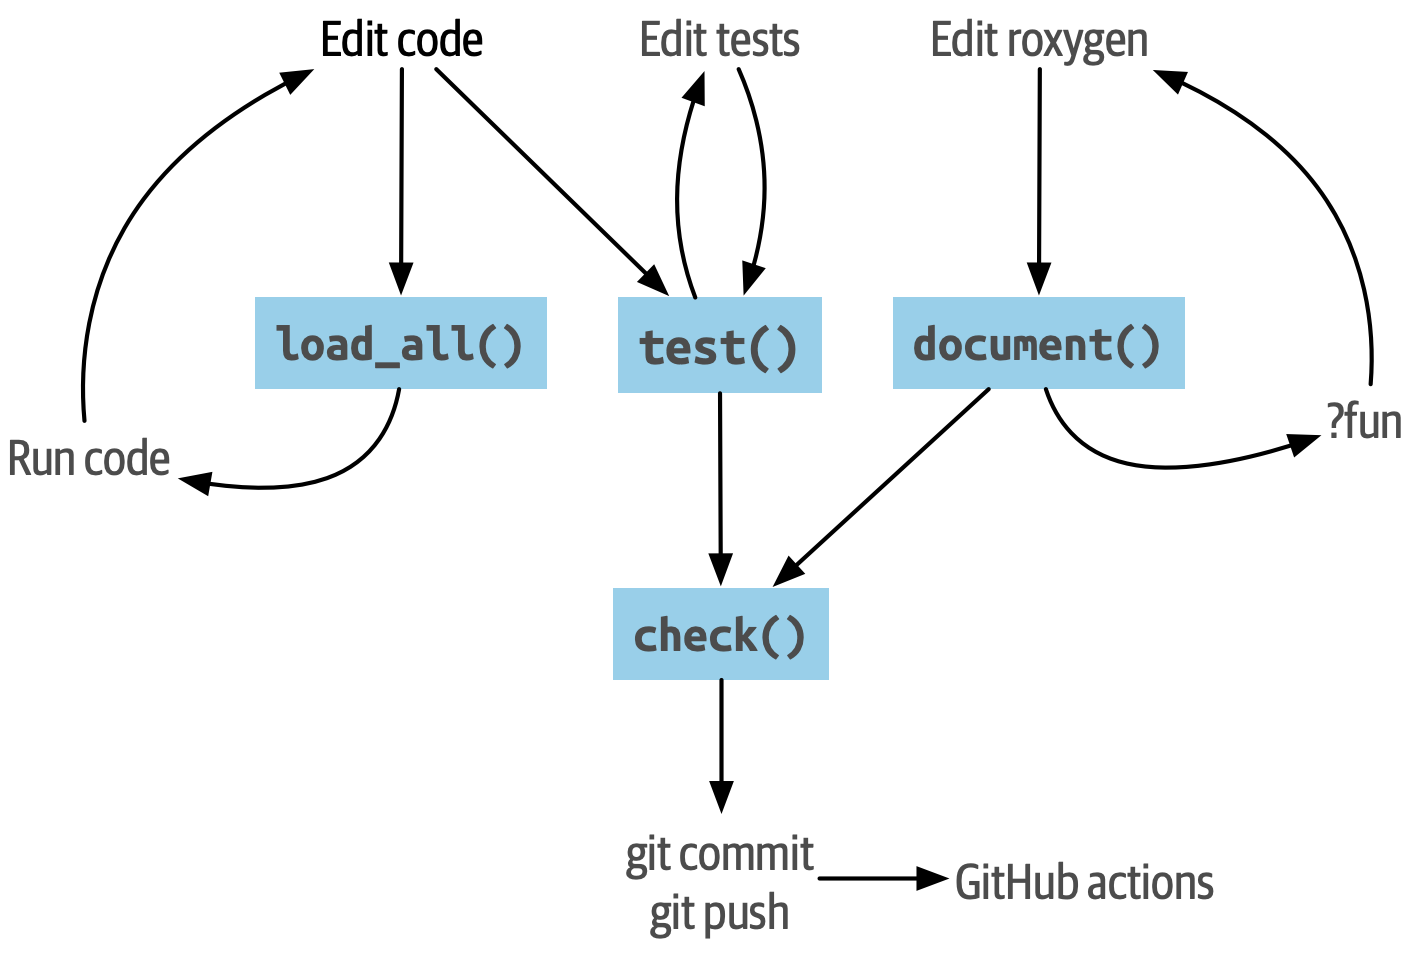 Diagram featuring 4 key functions in the devtools workflow: load_all(), test(), document(), and check(). Each is part of one or more loops indicated by arrows, depicting the typical process of editing code or tests or documentation, then test driving that code, running tests, or previewing documentation. check() connects externally to `git commit`, `git push`, and GitHub Actions.